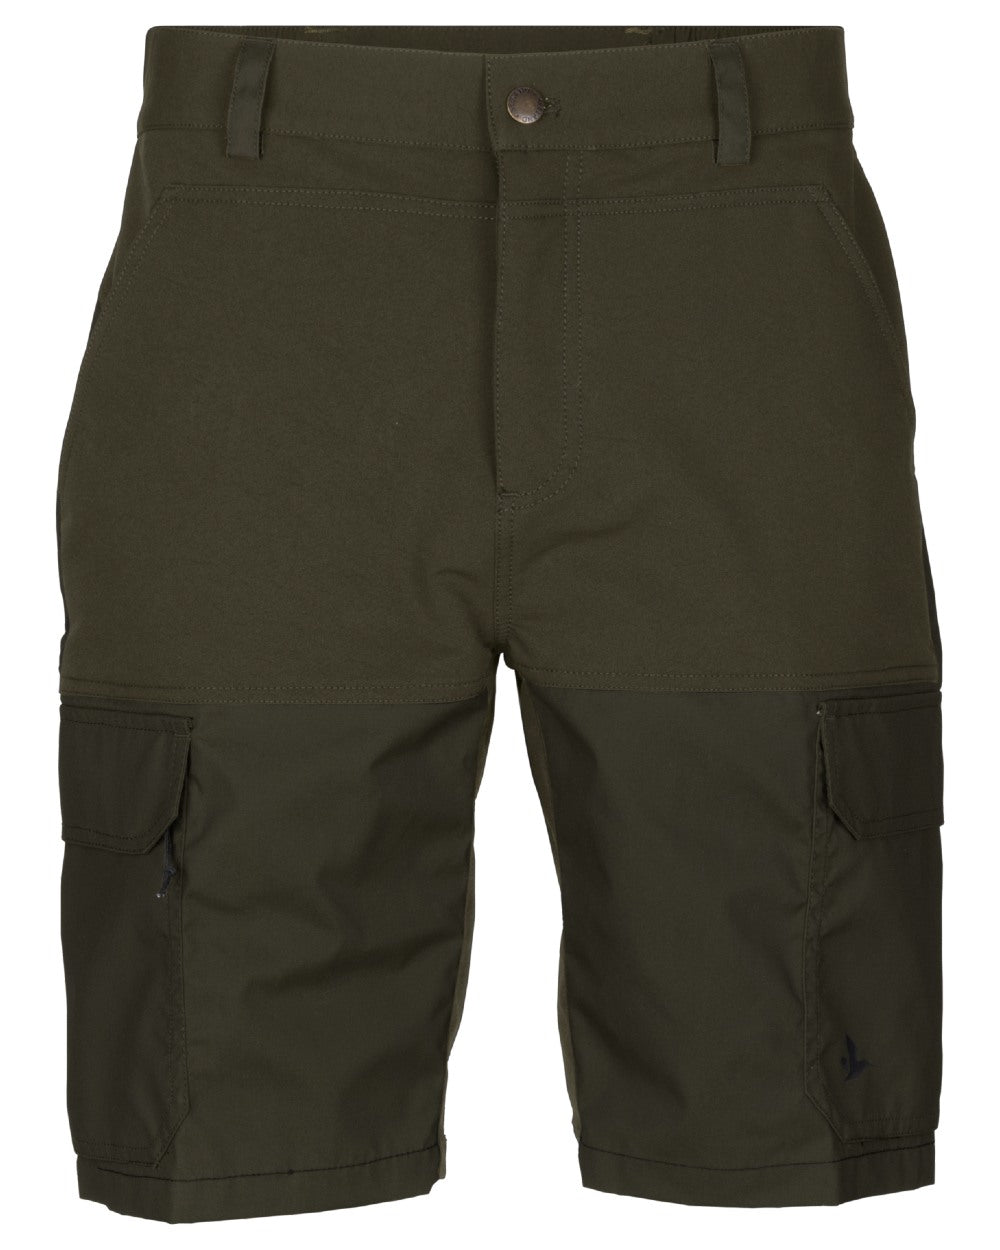 Light Pine/Grizzly Brown coloured Seeland Elm Shorts on white background